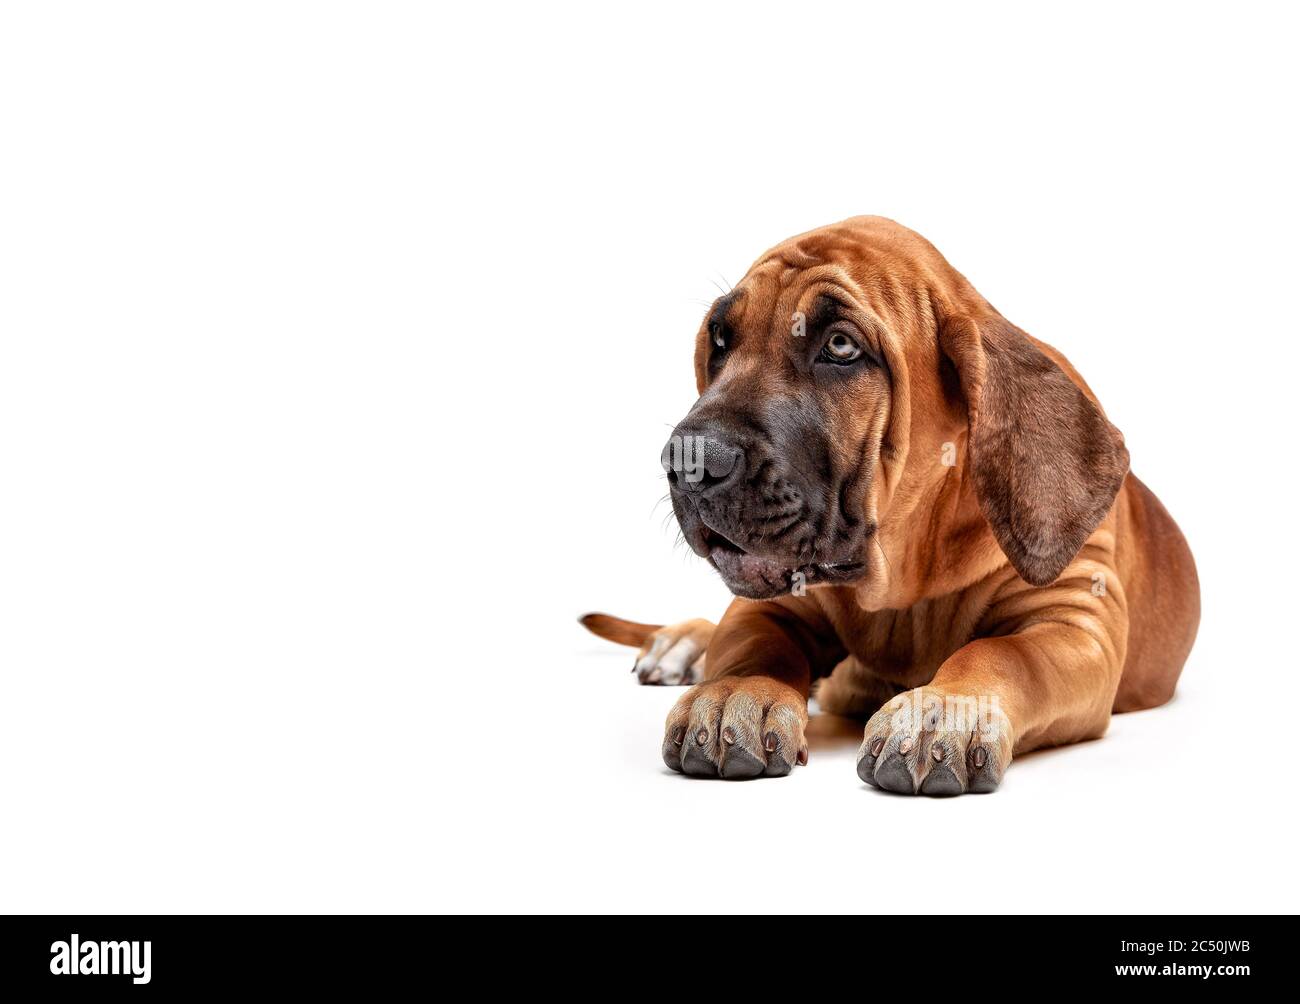 Dog breed fila brasileiro Cut Out Stock Images & Pictures - Alamy